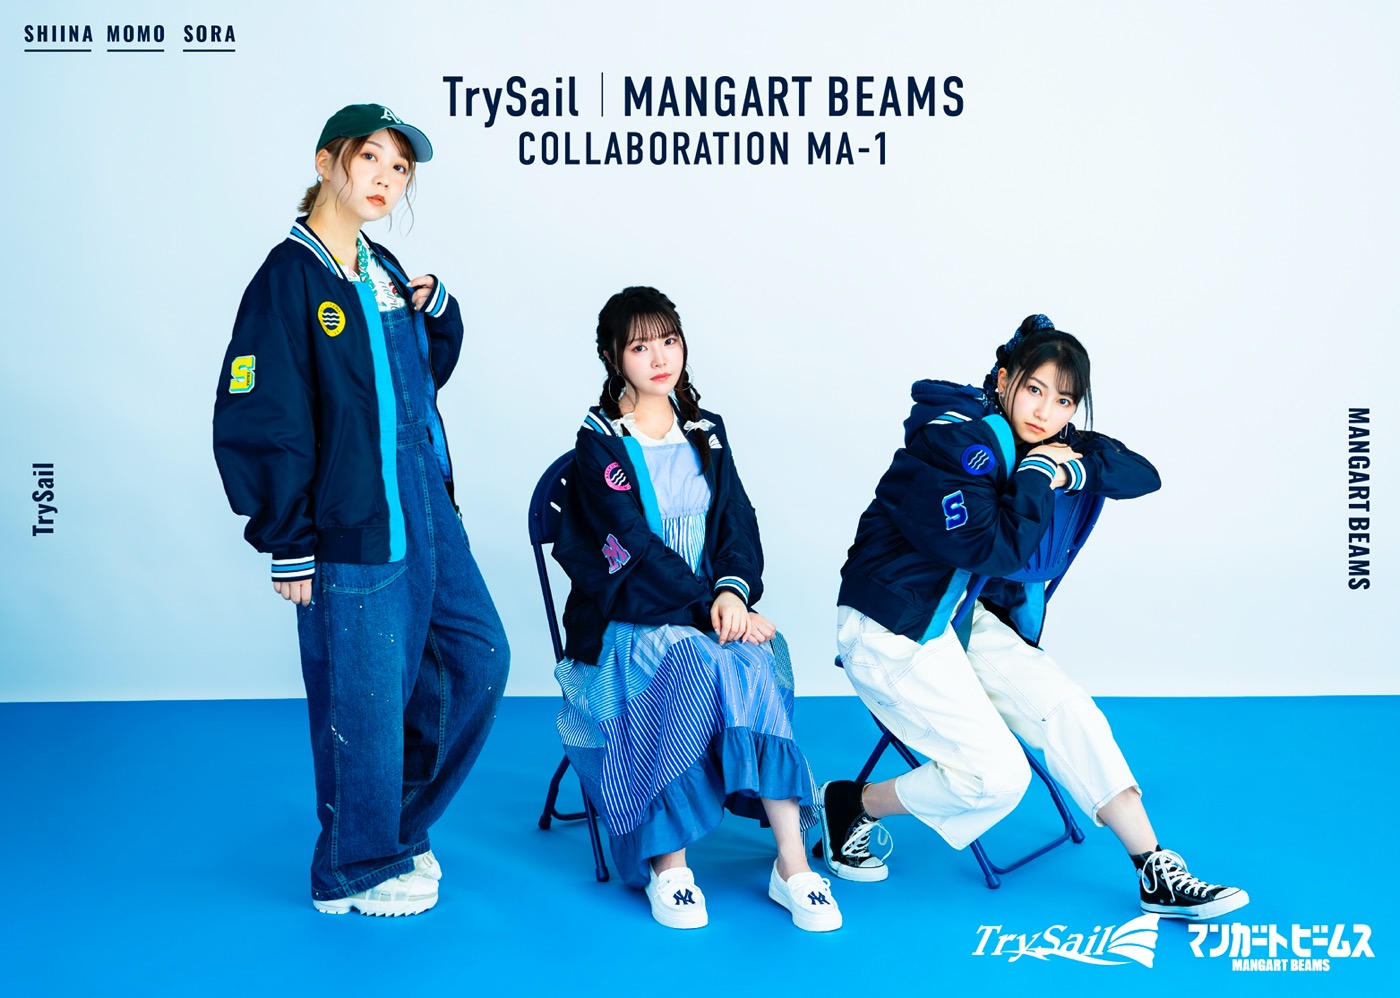 TrySailが「マンガート ビームス」とコラボ！ “TrySail MA-1”発売決定 - 画像一覧（1/1）